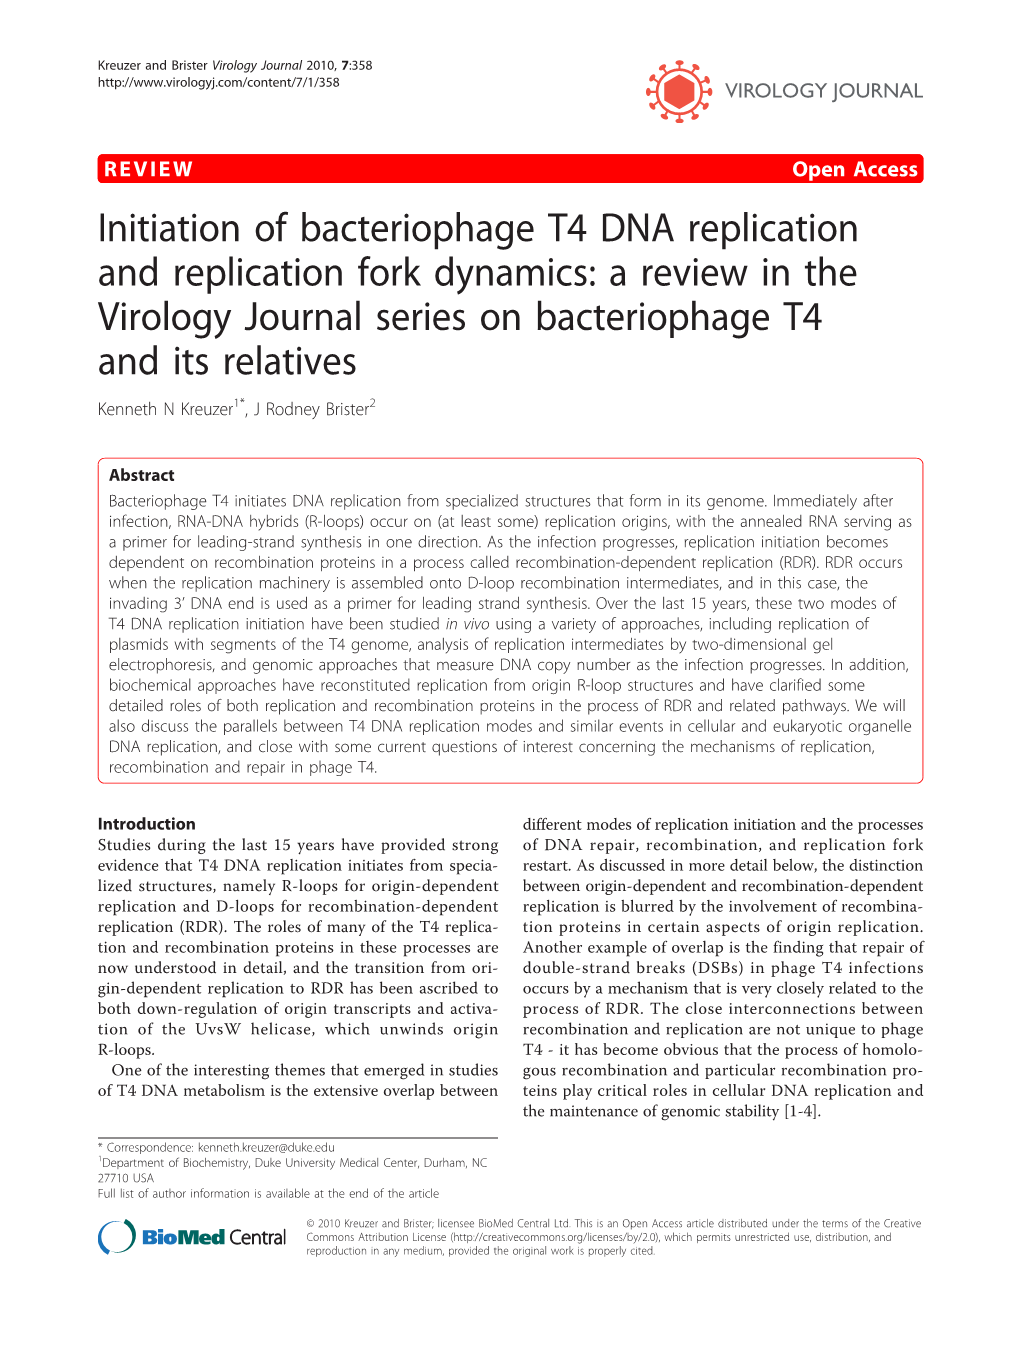 Initiation of Bacteriophage T4 DNA Replication and Replication Fork